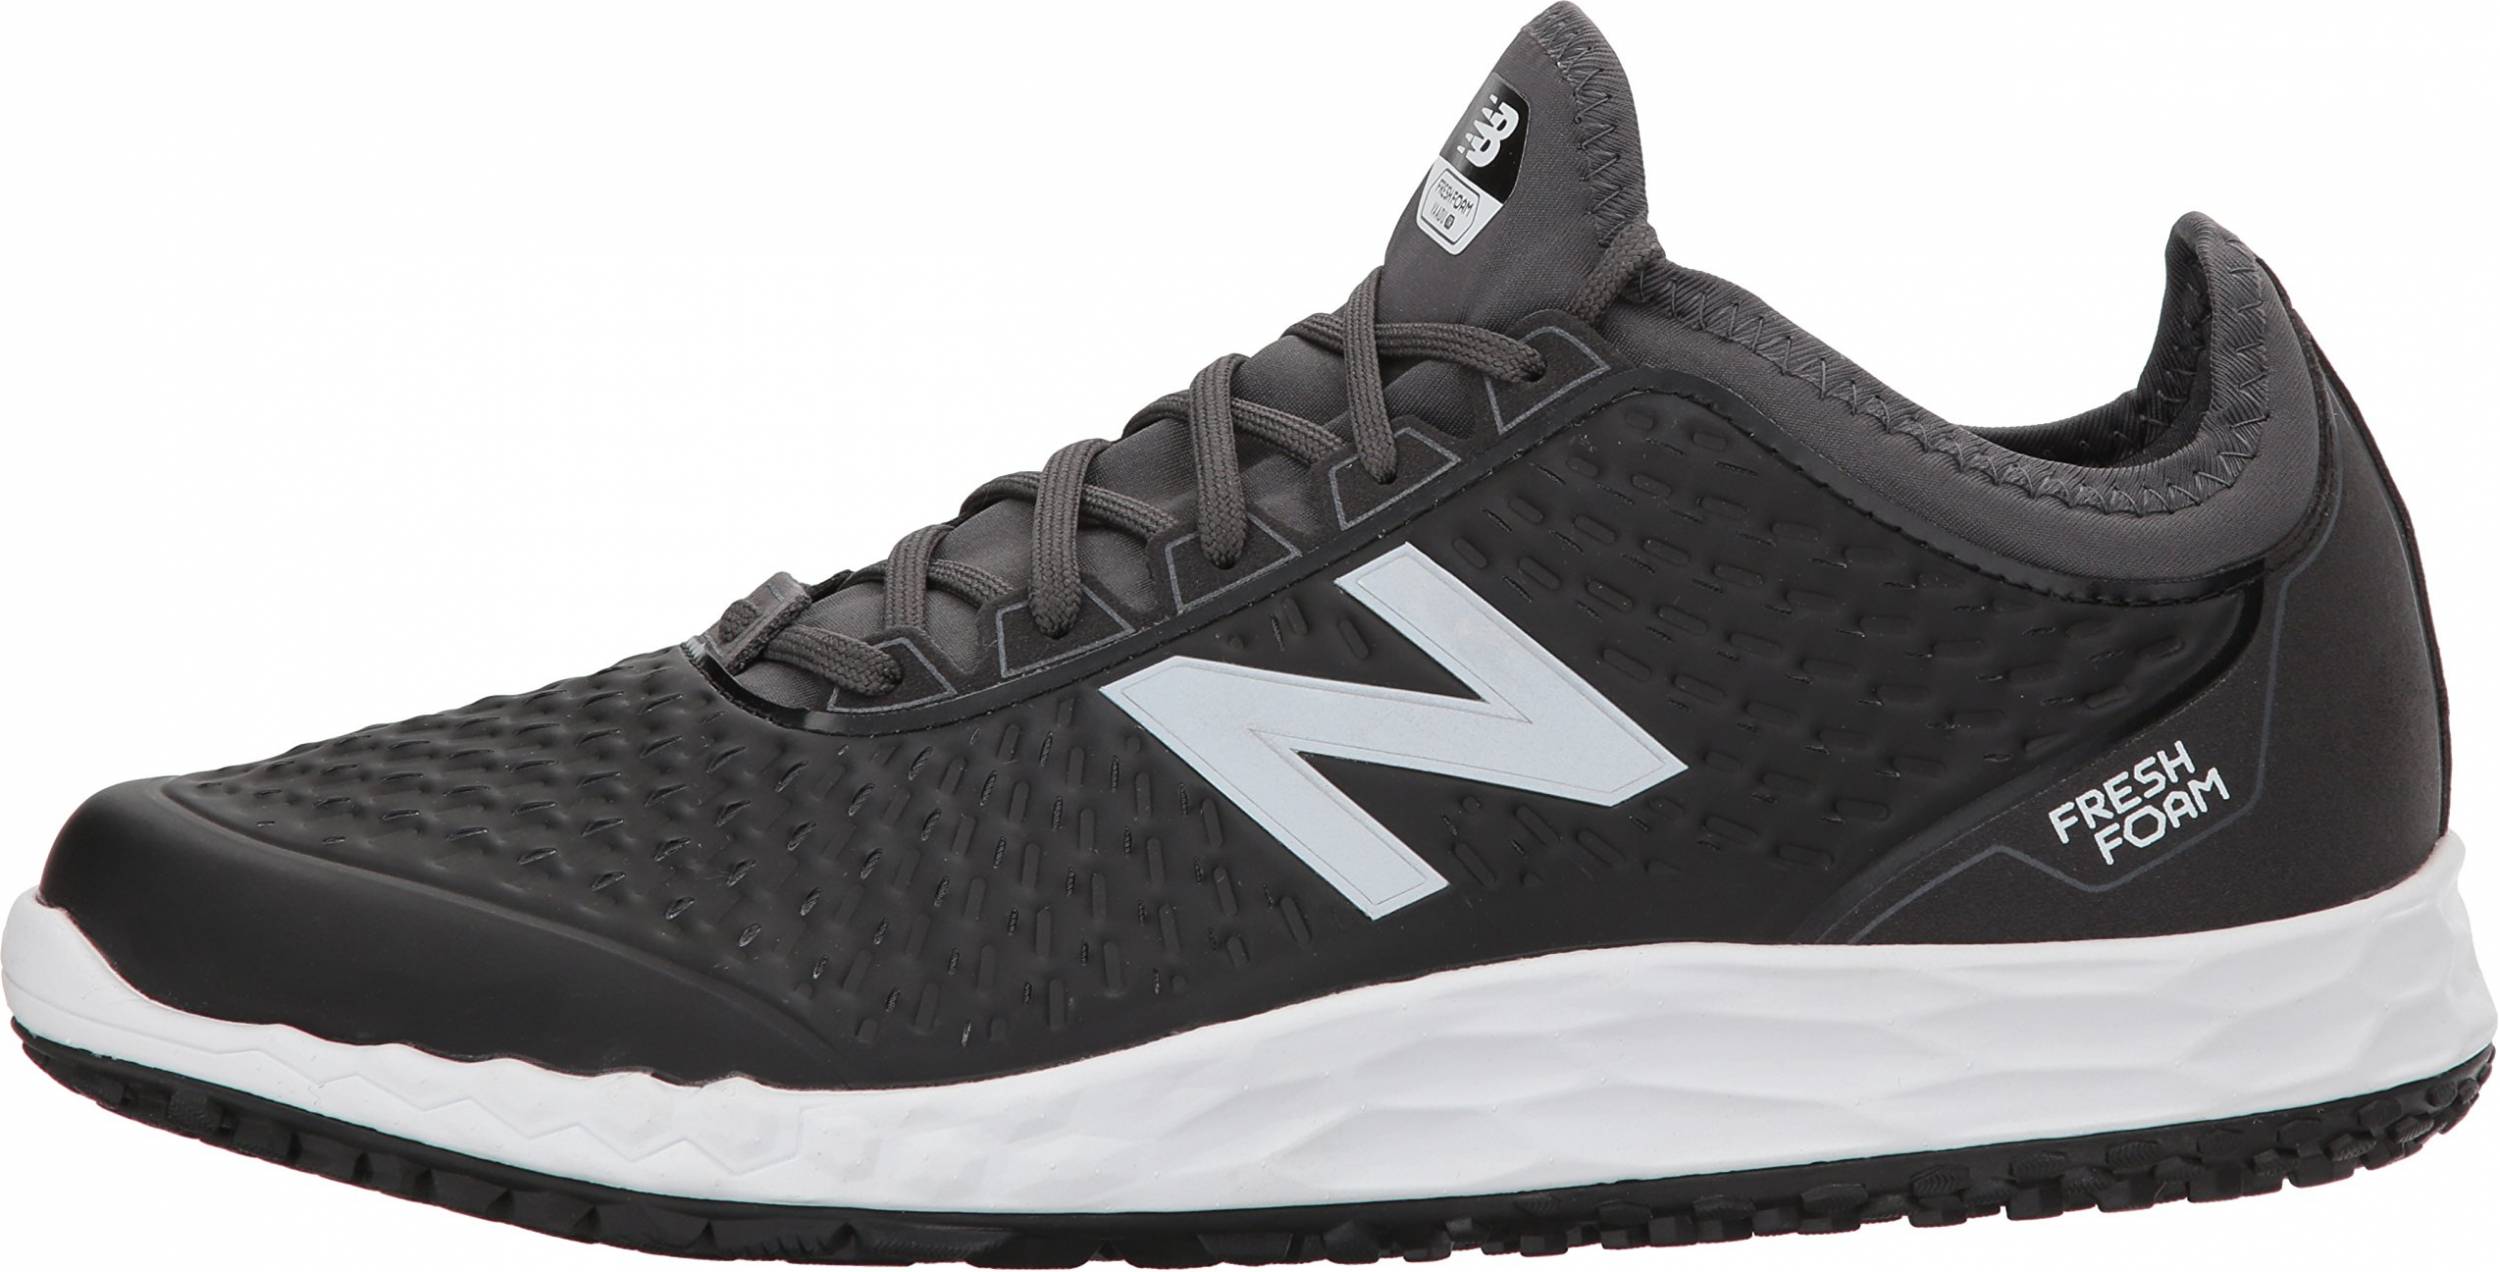 Save 30% on New Balance Workout Shoes 